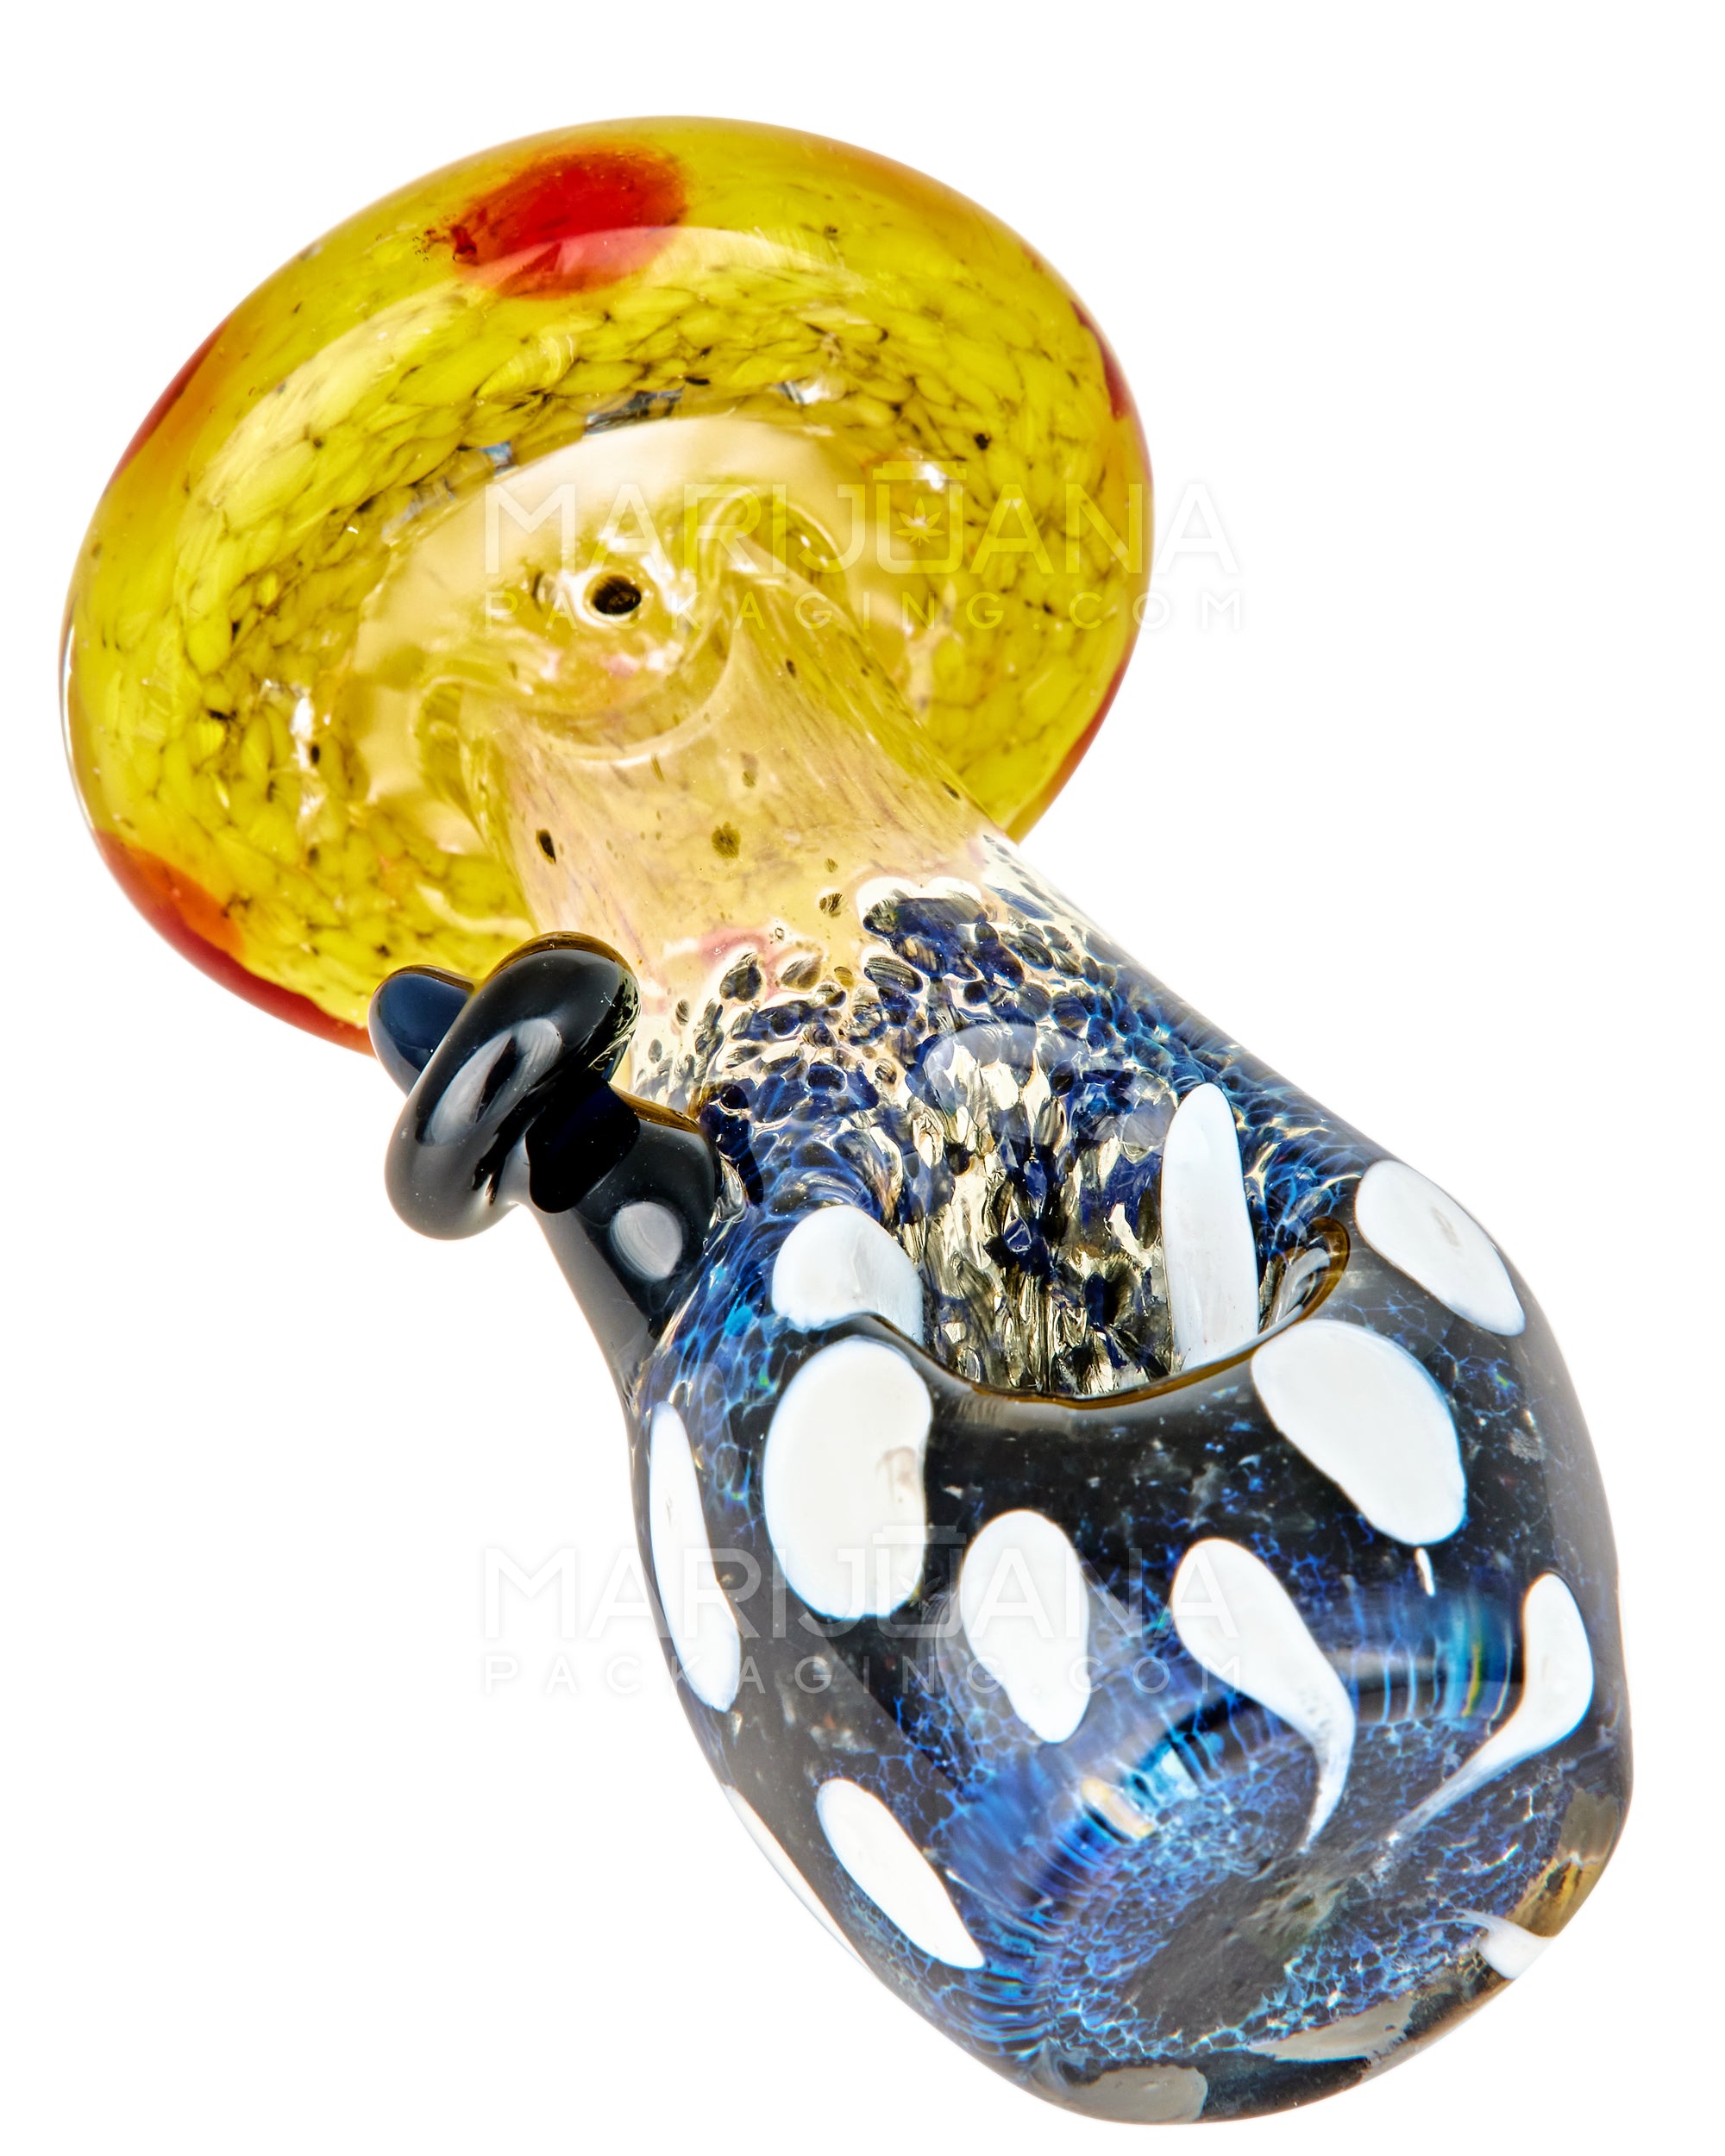 Frit & Multi Fumed Mushroom Hand Pipe w/ Ribboning & Glass Handle | 4in Long - Glass - Assorted - 9